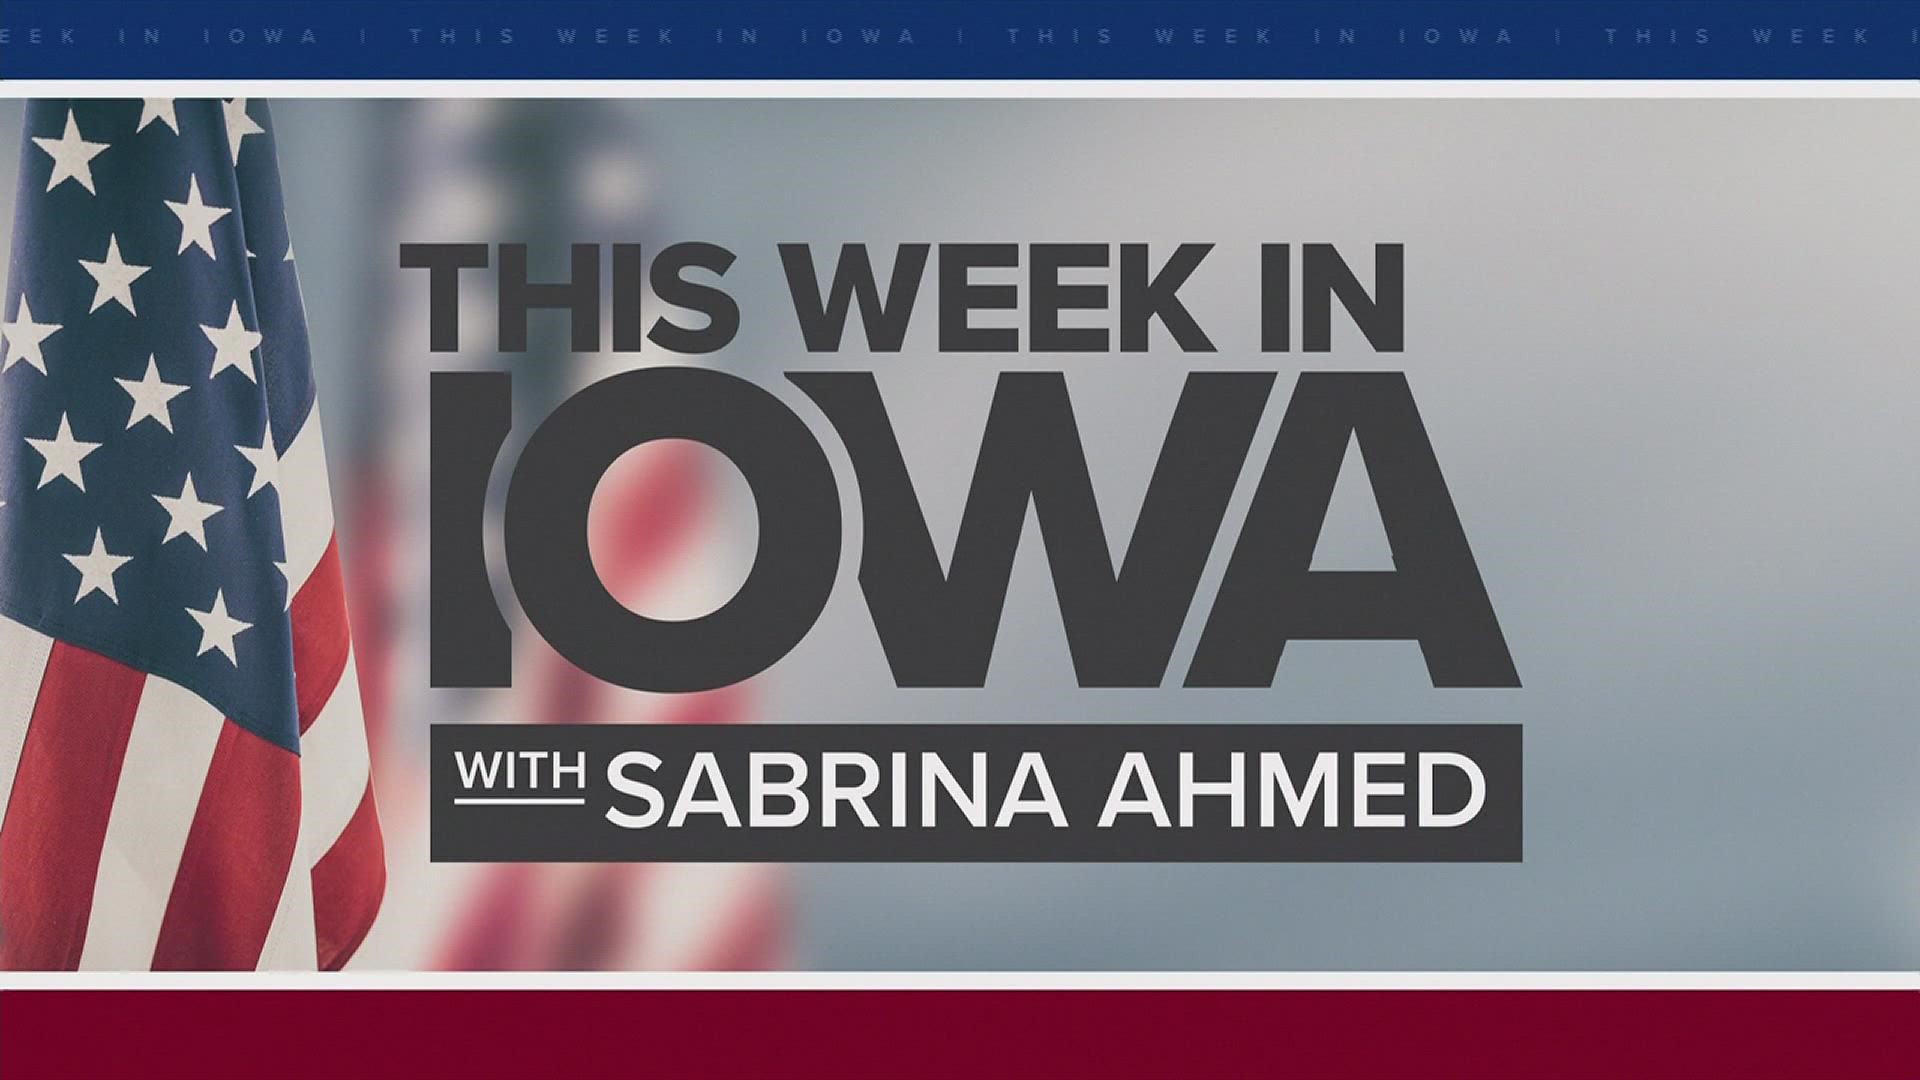 You can watch "This Week in Iowa" every Sunday at 9 a.m. on Local 5 and WeAreIowa.com/Watch.